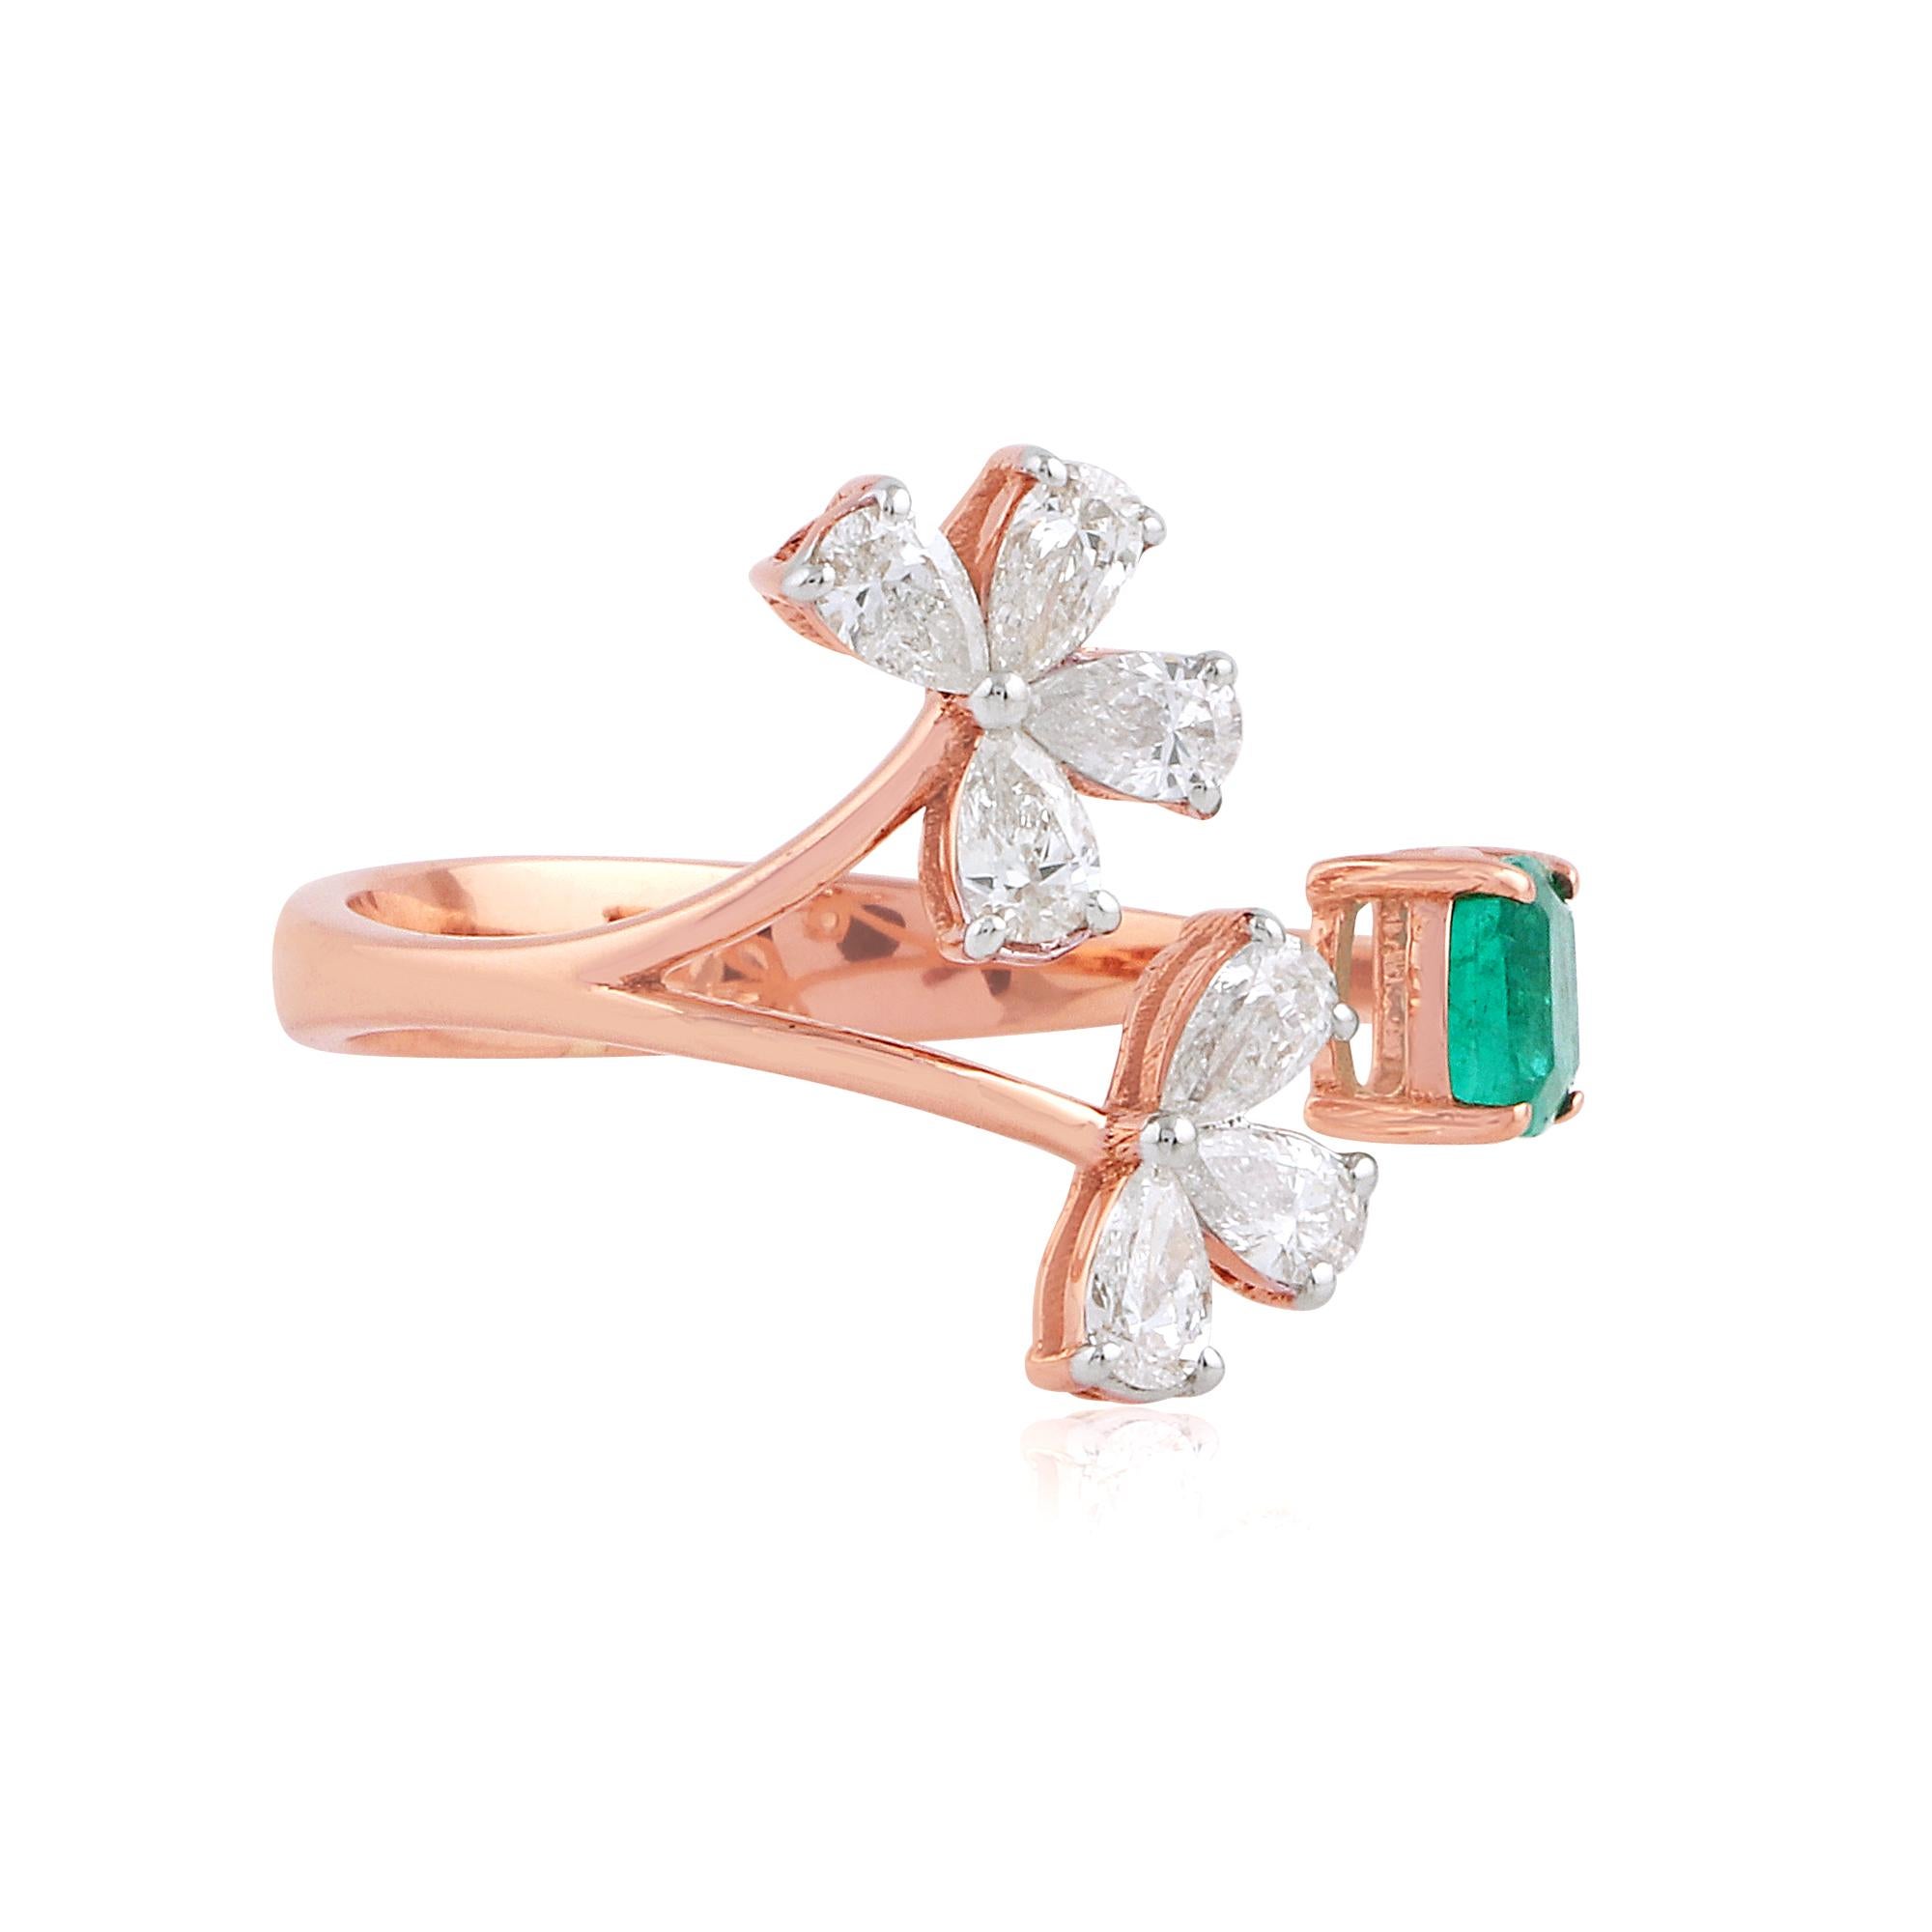 For Sale:  Natural Emerald Gemstone Cuff Ring Pear Diamond Solid 18k Rose Gold Fine Jewelry 2